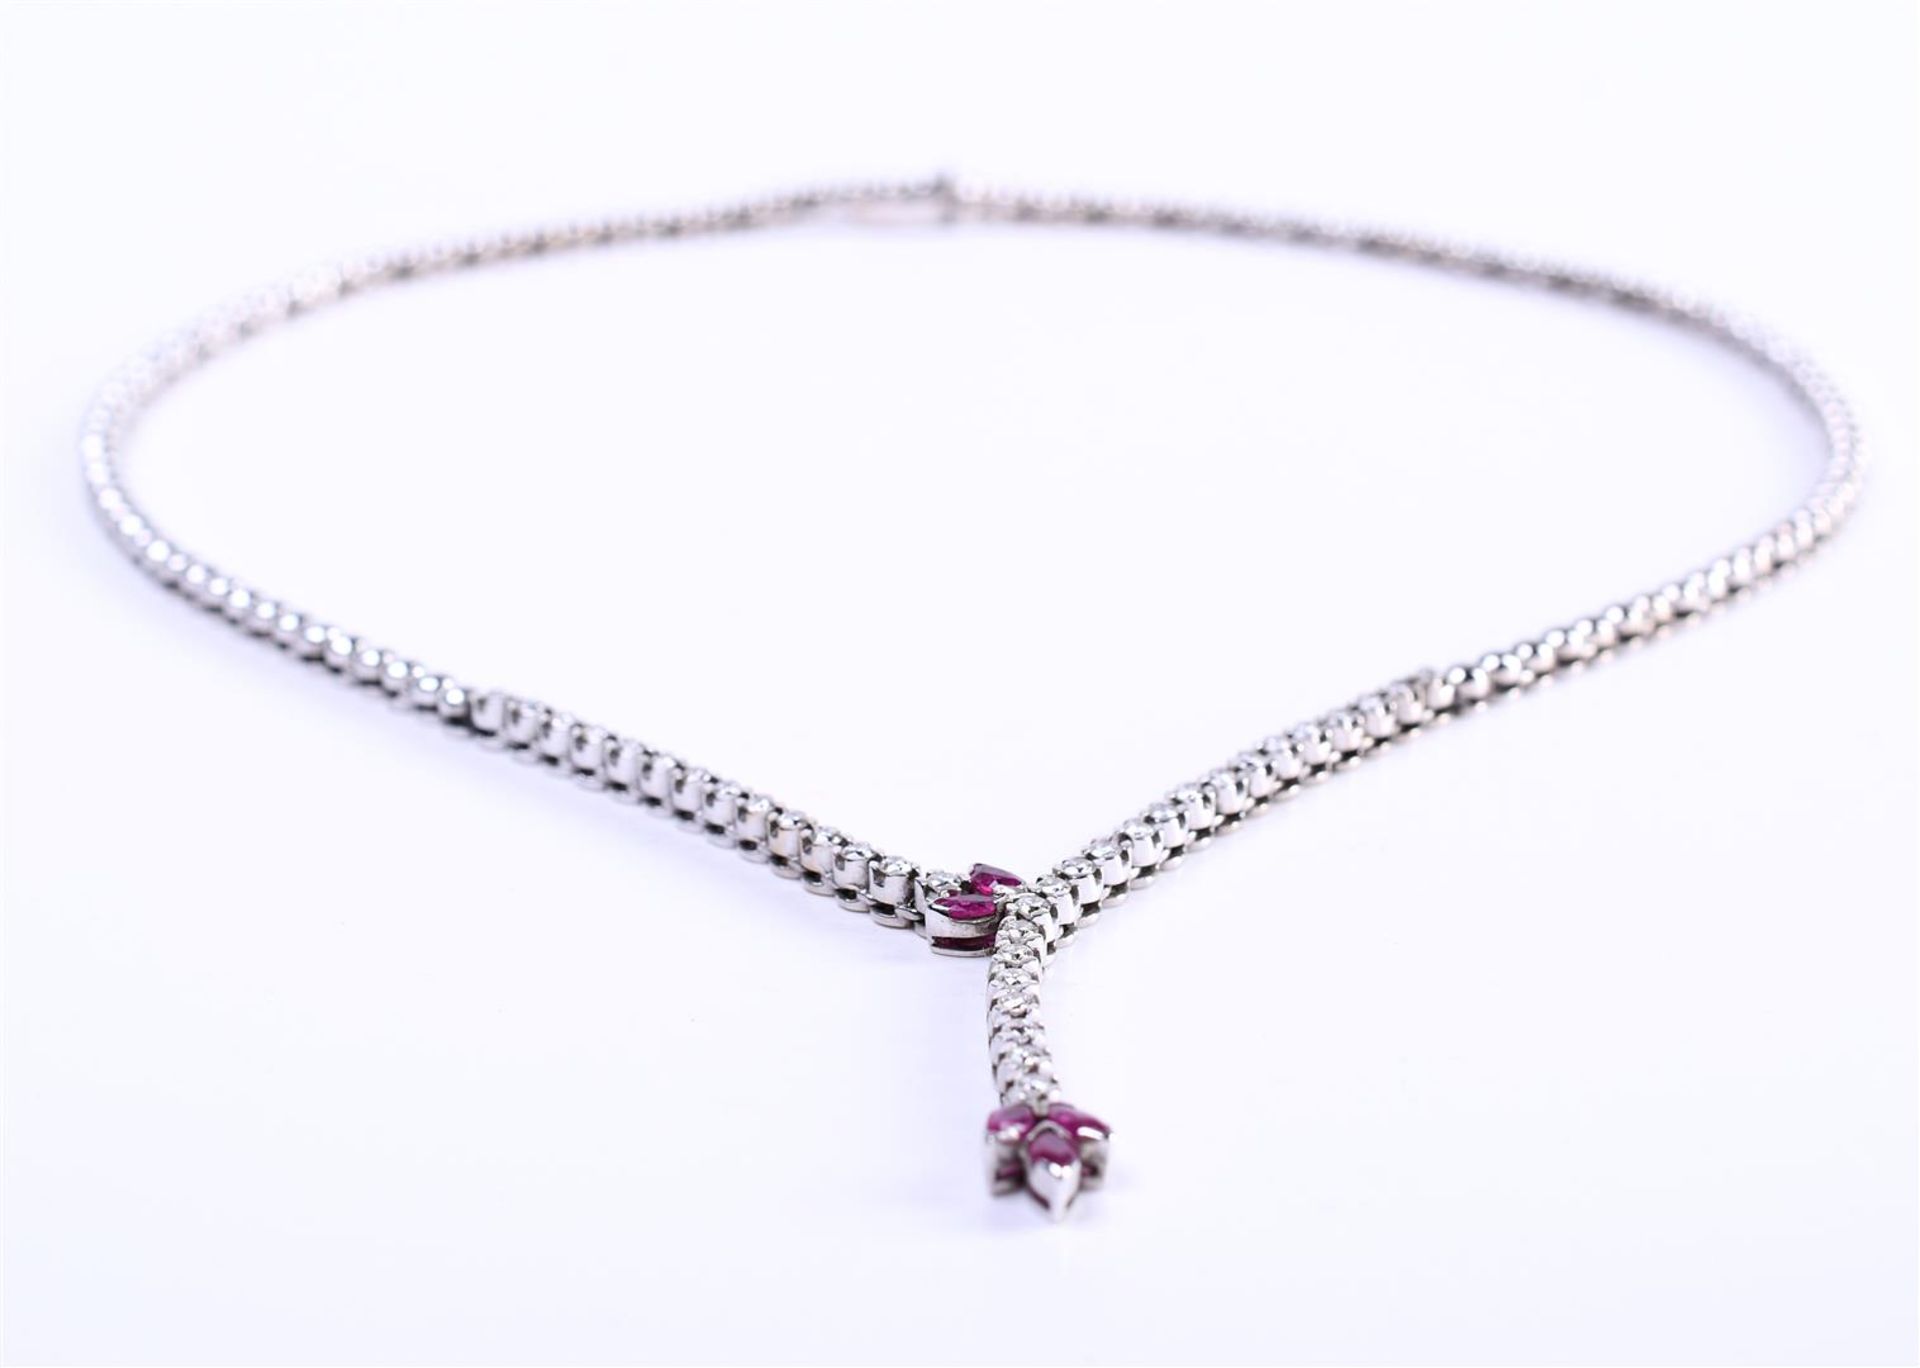 18 carat white gold tennis necklace with a box clasp closure and an extra safety eight - Bild 3 aus 6